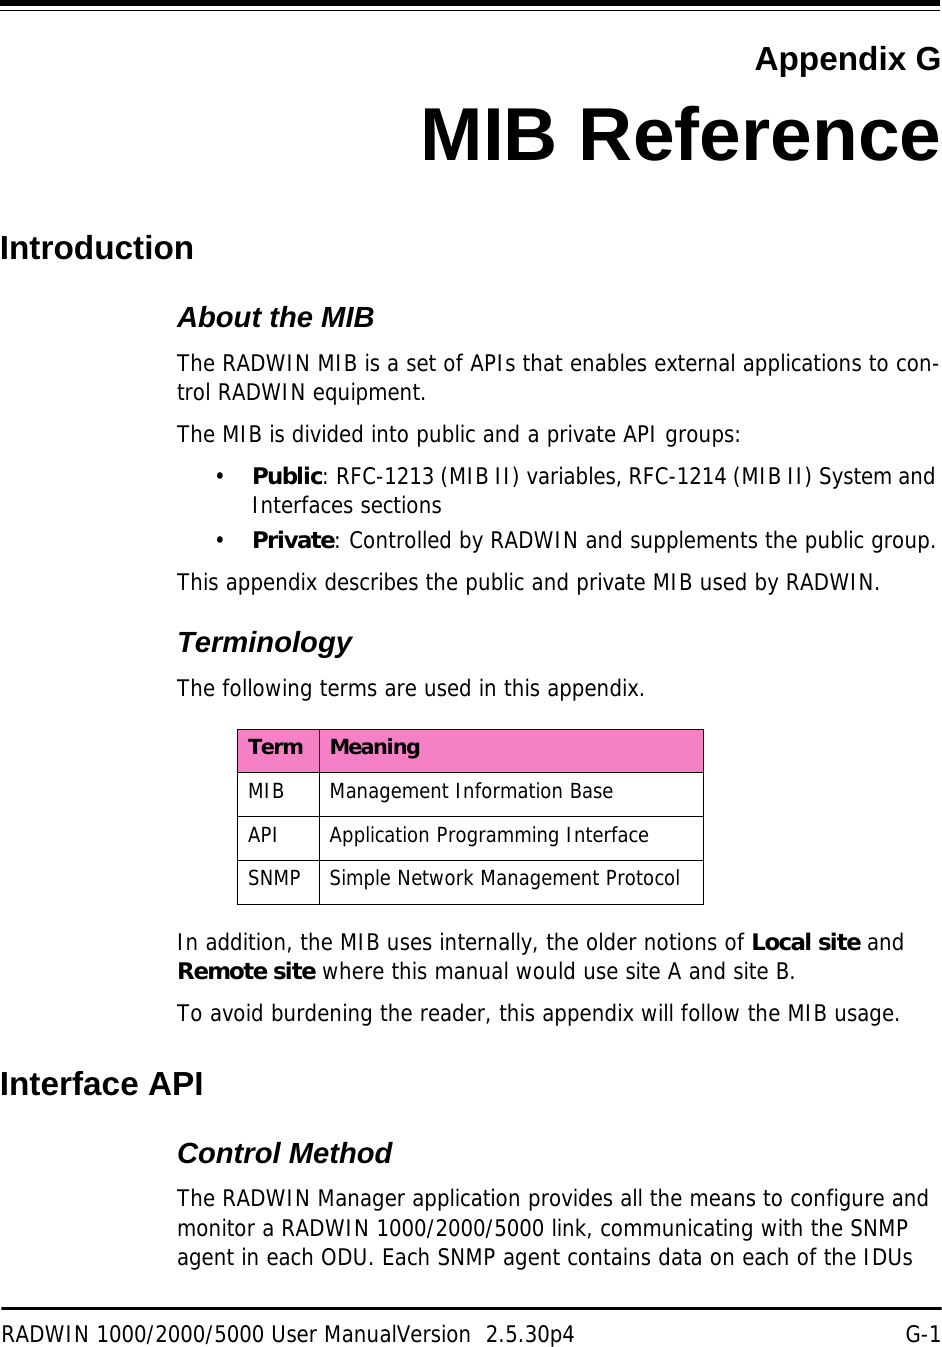 RADWIN 1000/2000/5000 User ManualVersion  2.5.30p4 G-1Appendix GMIB ReferenceIntroductionAbout the MIBThe RADWIN MIB is a set of APIs that enables external applications to con-trol RADWIN equipment.The MIB is divided into public and a private API groups:•Public: RFC-1213 (MIB II) variables, RFC-1214 (MIB II) System and Interfaces sections•Private: Controlled by RADWIN and supplements the public group.This appendix describes the public and private MIB used by RADWIN.TerminologyThe following terms are used in this appendix.In addition, the MIB uses internally, the older notions of Local site and Remote site where this manual would use site A and site B.To avoid burdening the reader, this appendix will follow the MIB usage.Interface APIControl MethodThe RADWIN Manager application provides all the means to configure and monitor a RADWIN 1000/2000/5000 link, communicating with the SNMP agent in each ODU. Each SNMP agent contains data on each of the IDUs Term MeaningMIB Management Information BaseAPI Application Programming InterfaceSNMP Simple Network Management Protocol